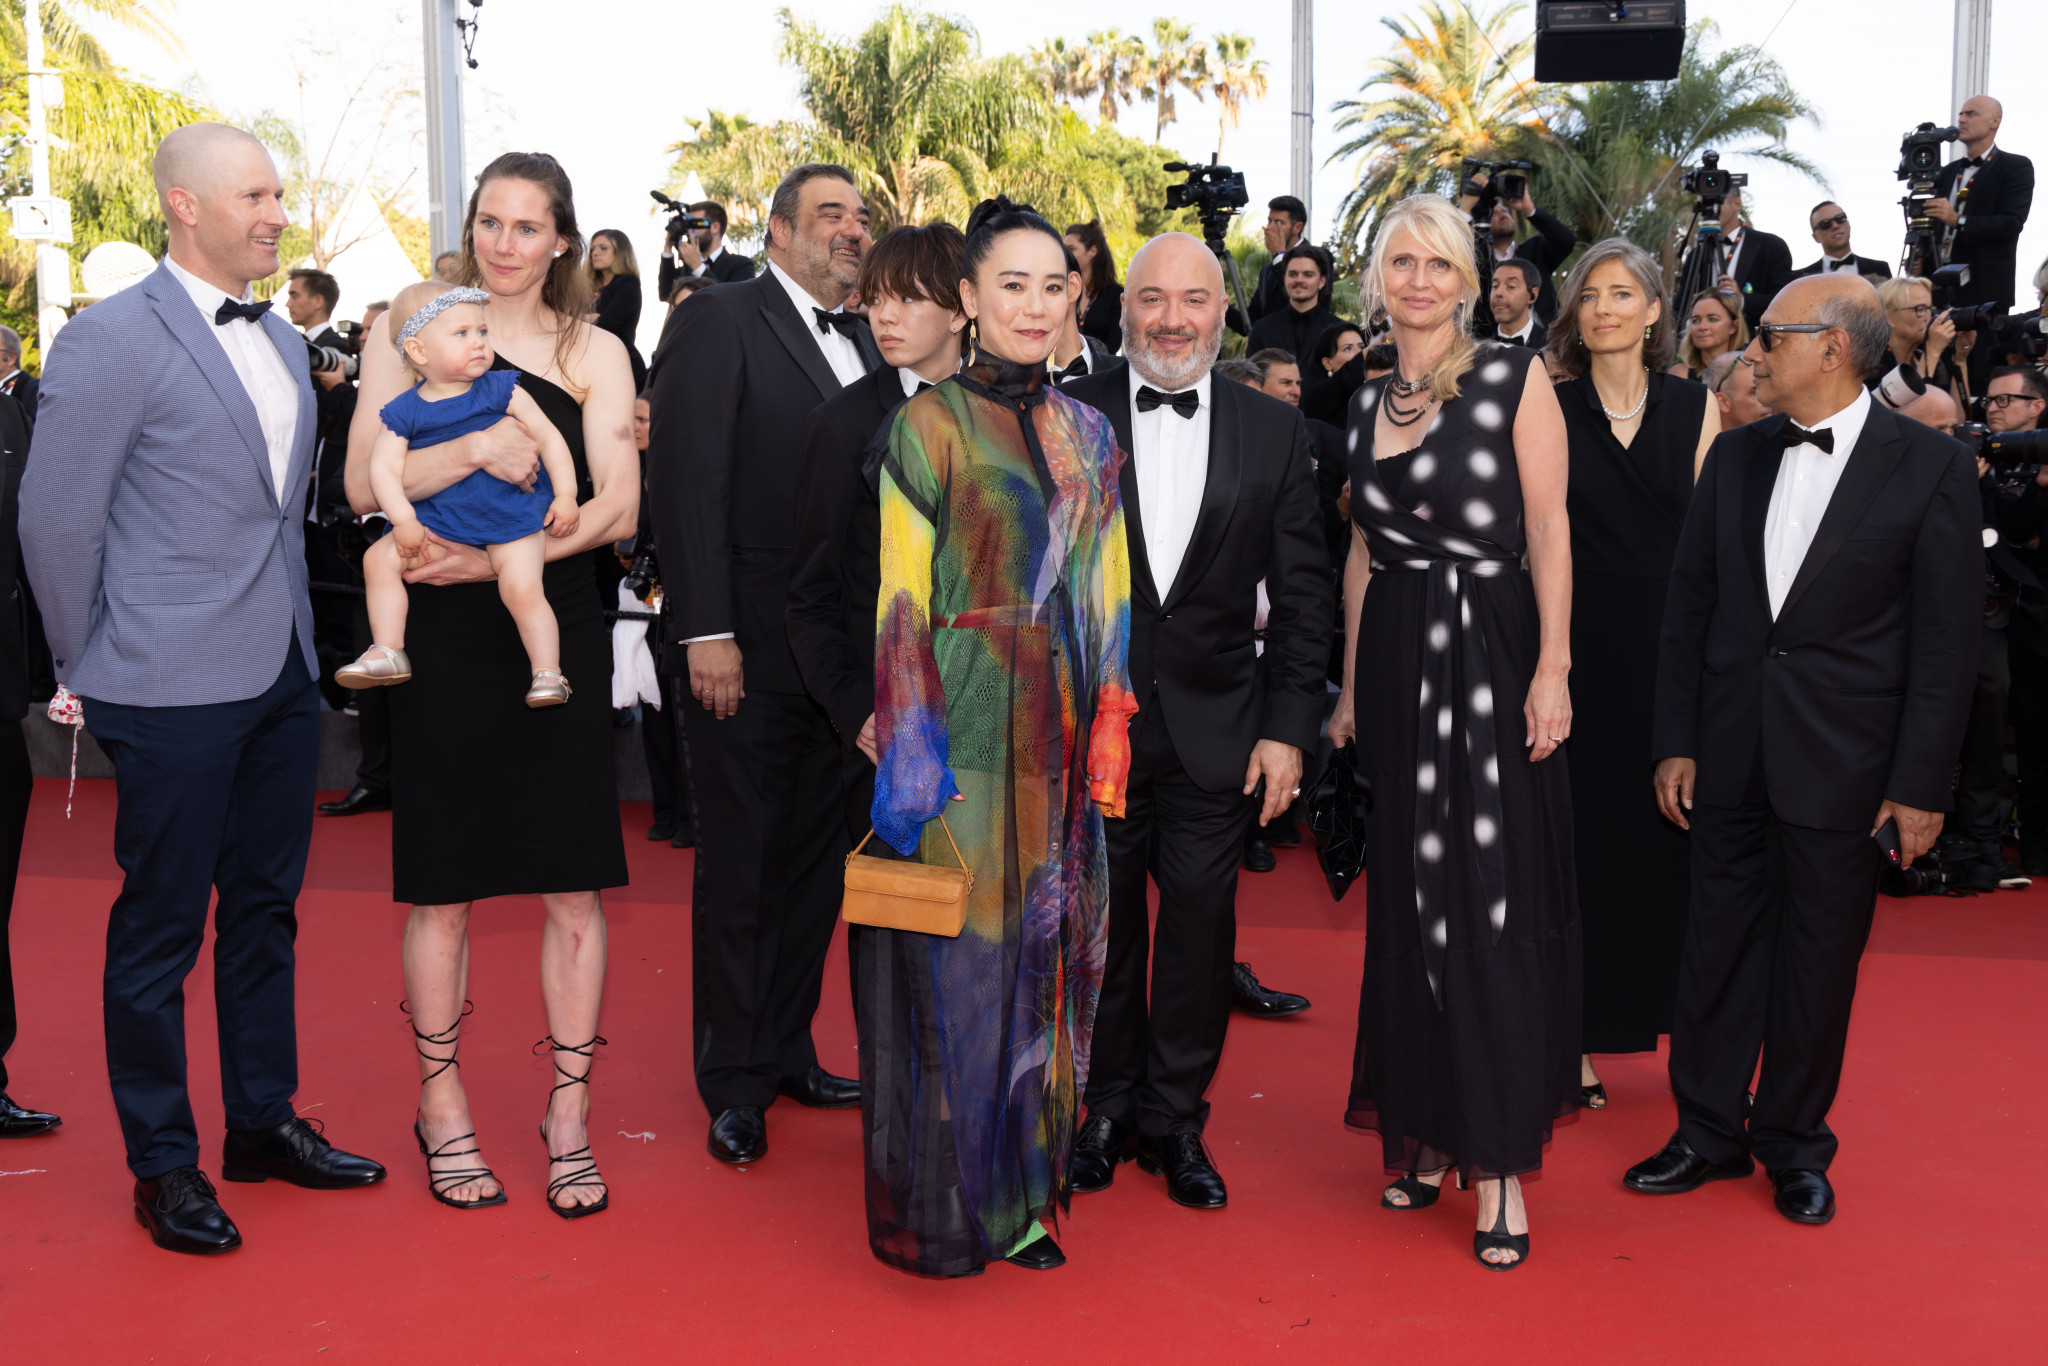 Olympic film director Naomi Kawase, centre, treads the red carpet at Cannes with Canadian basketball player Kim Goucher and baby Sophie who feature heavily in the film ©Kazuko Wakayama 